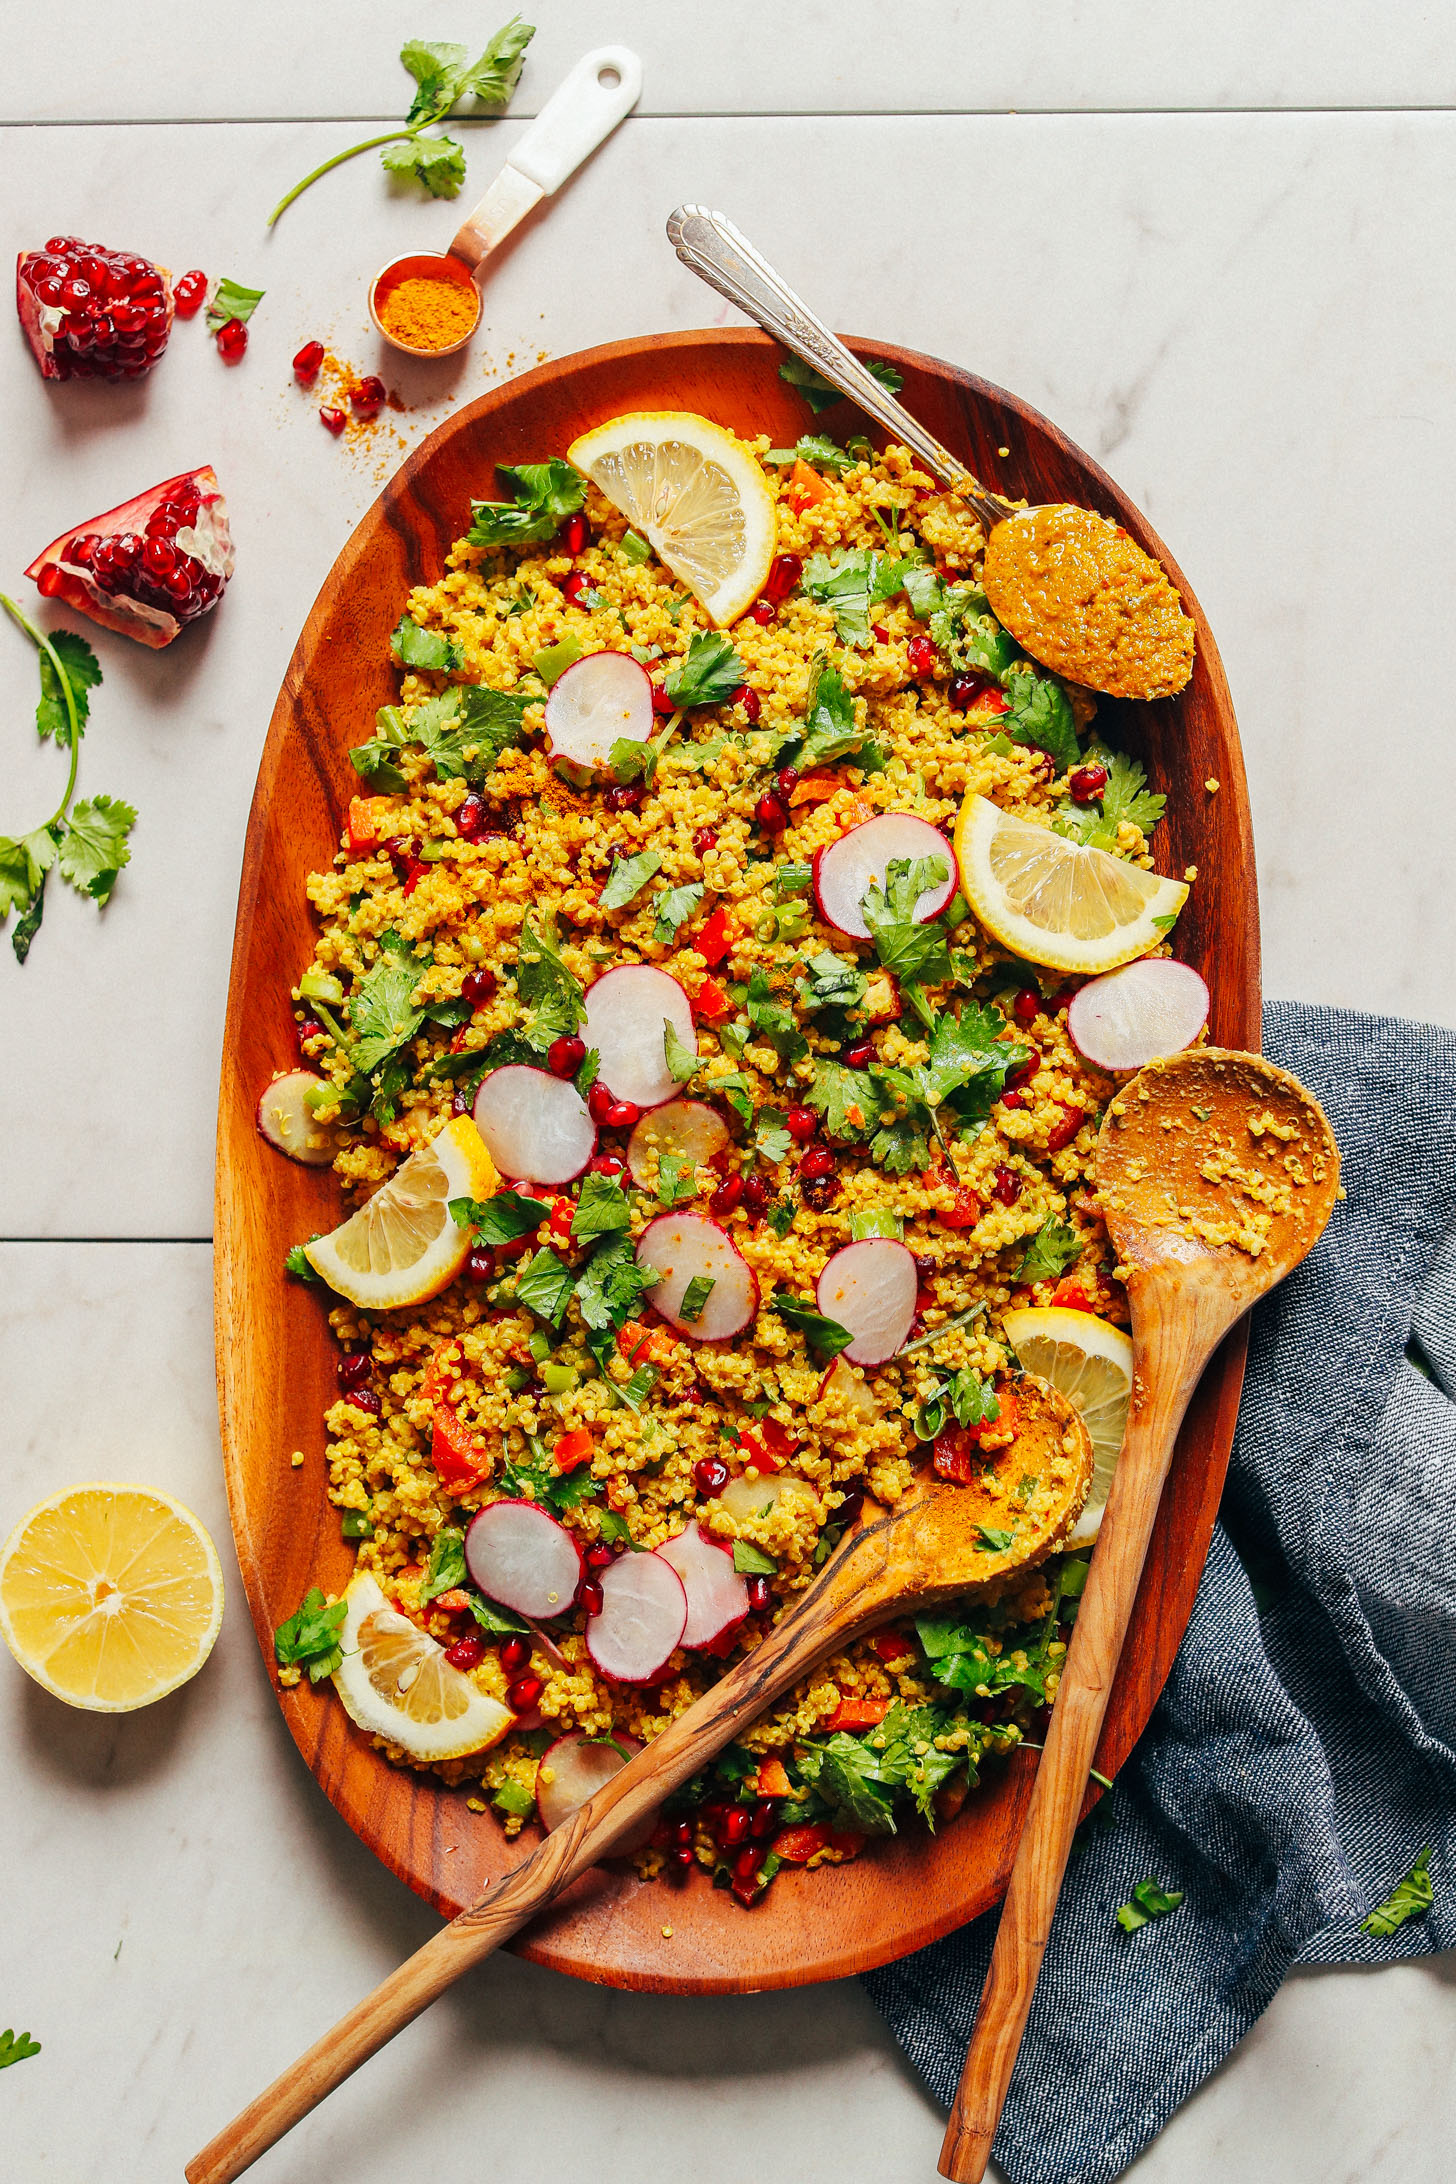 Large wood platter with gluten-free vegan Curried Quinoa Salad with fresh vegetables